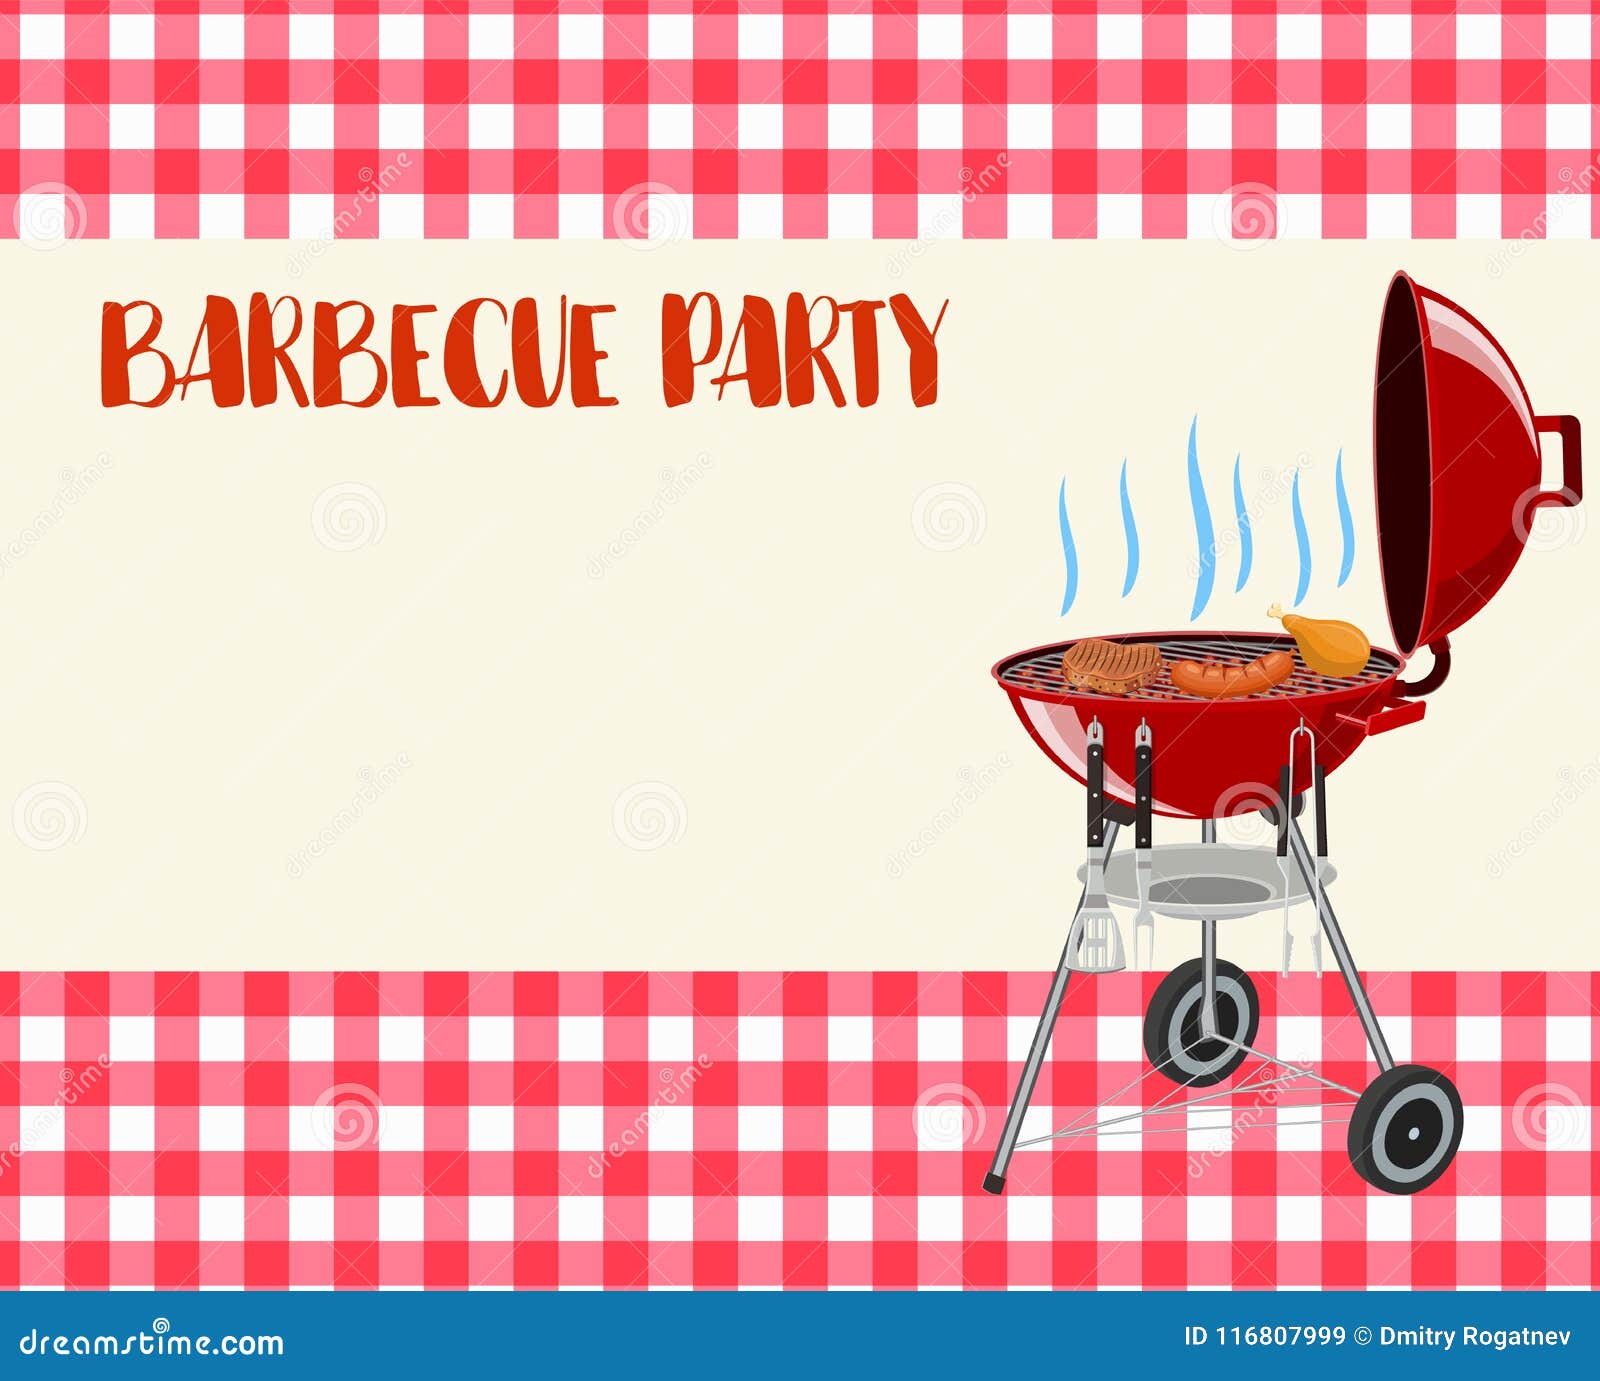 Barbeque Invitation Template from thumbs.dreamstime.com